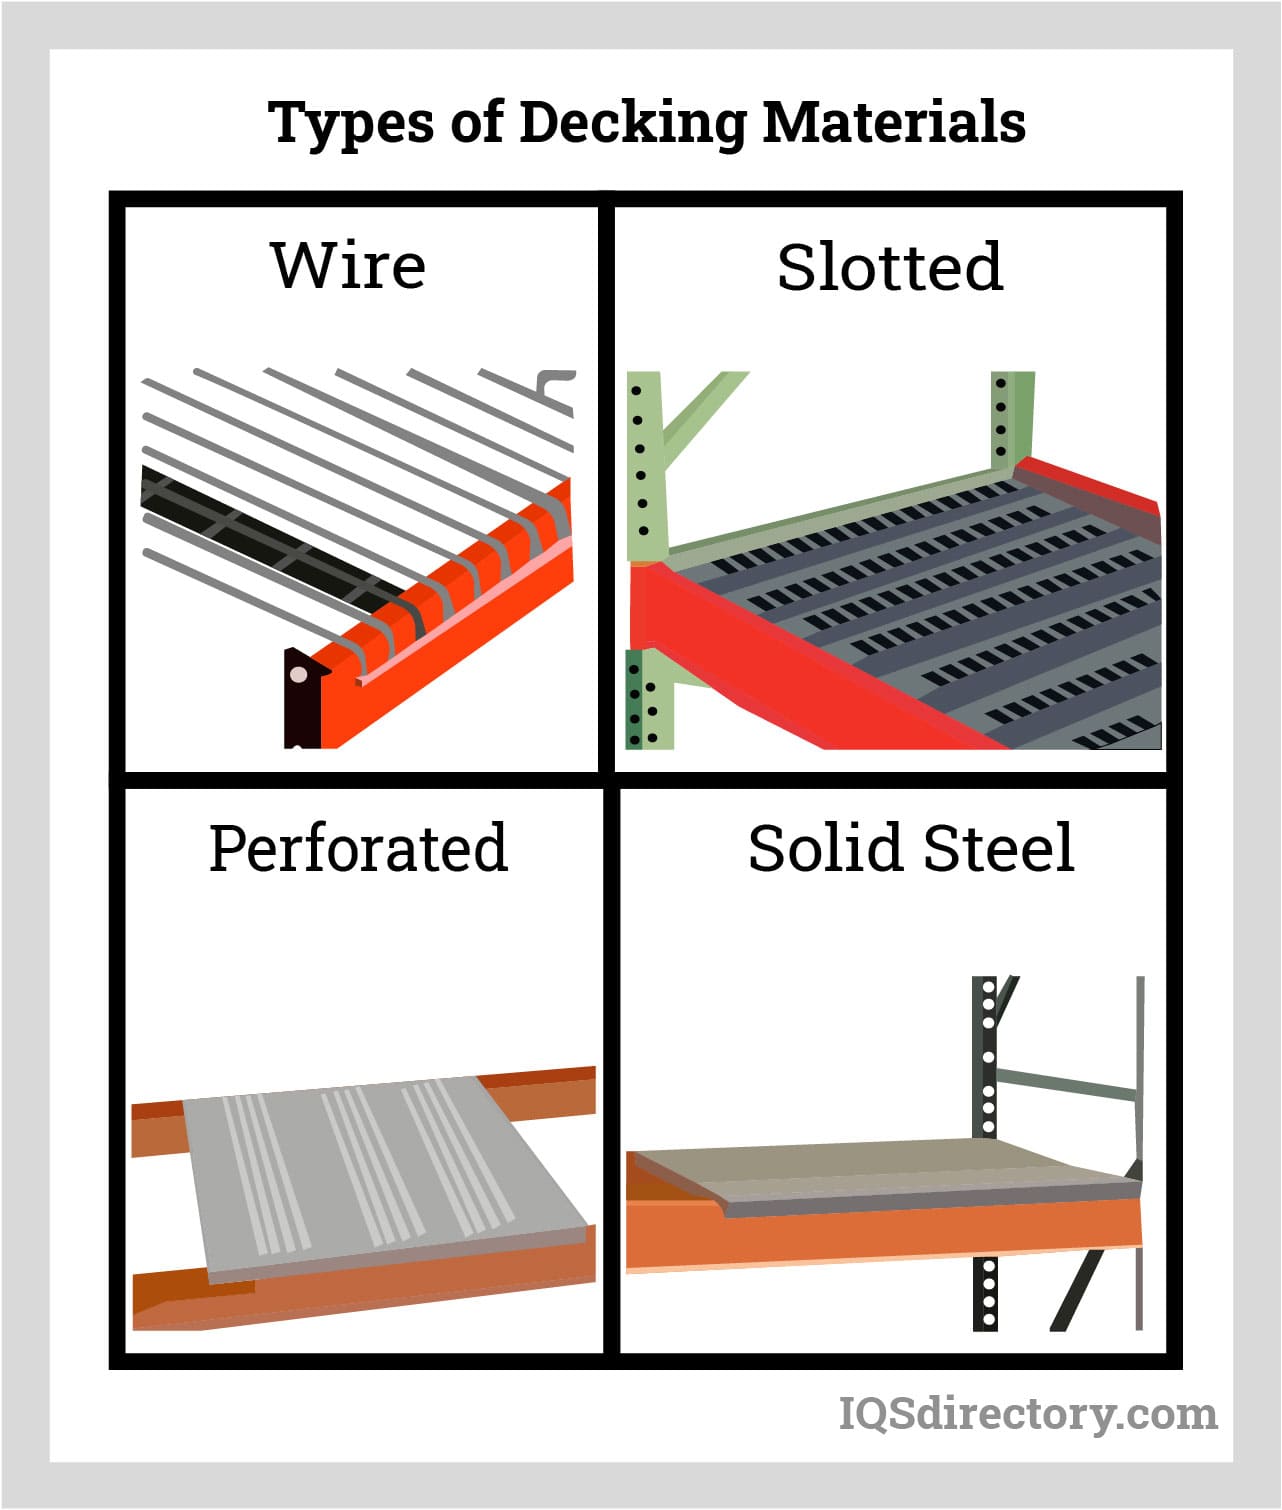 Types of Decking Materials